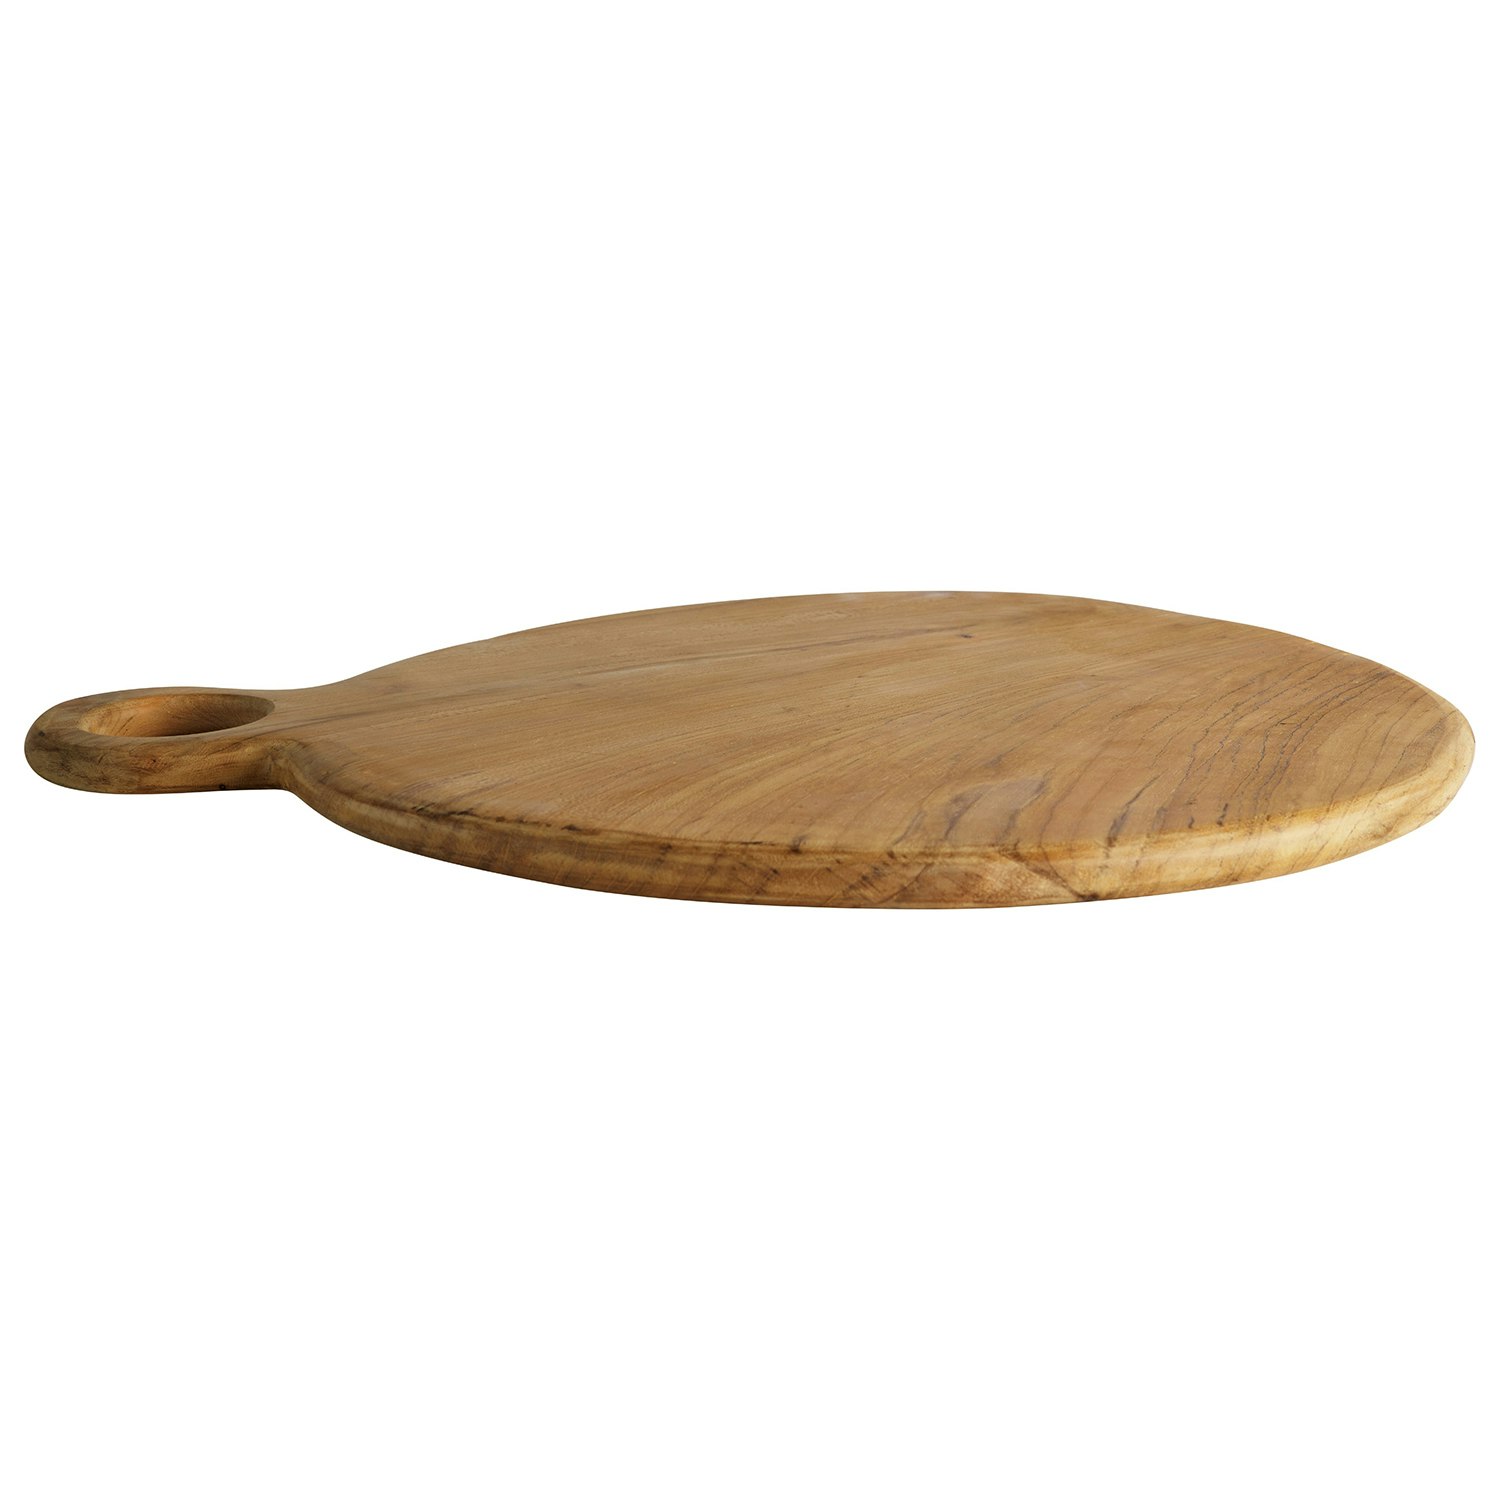 Round wooden chopping board cutting serving pizza solid wood 40 cm - RAW